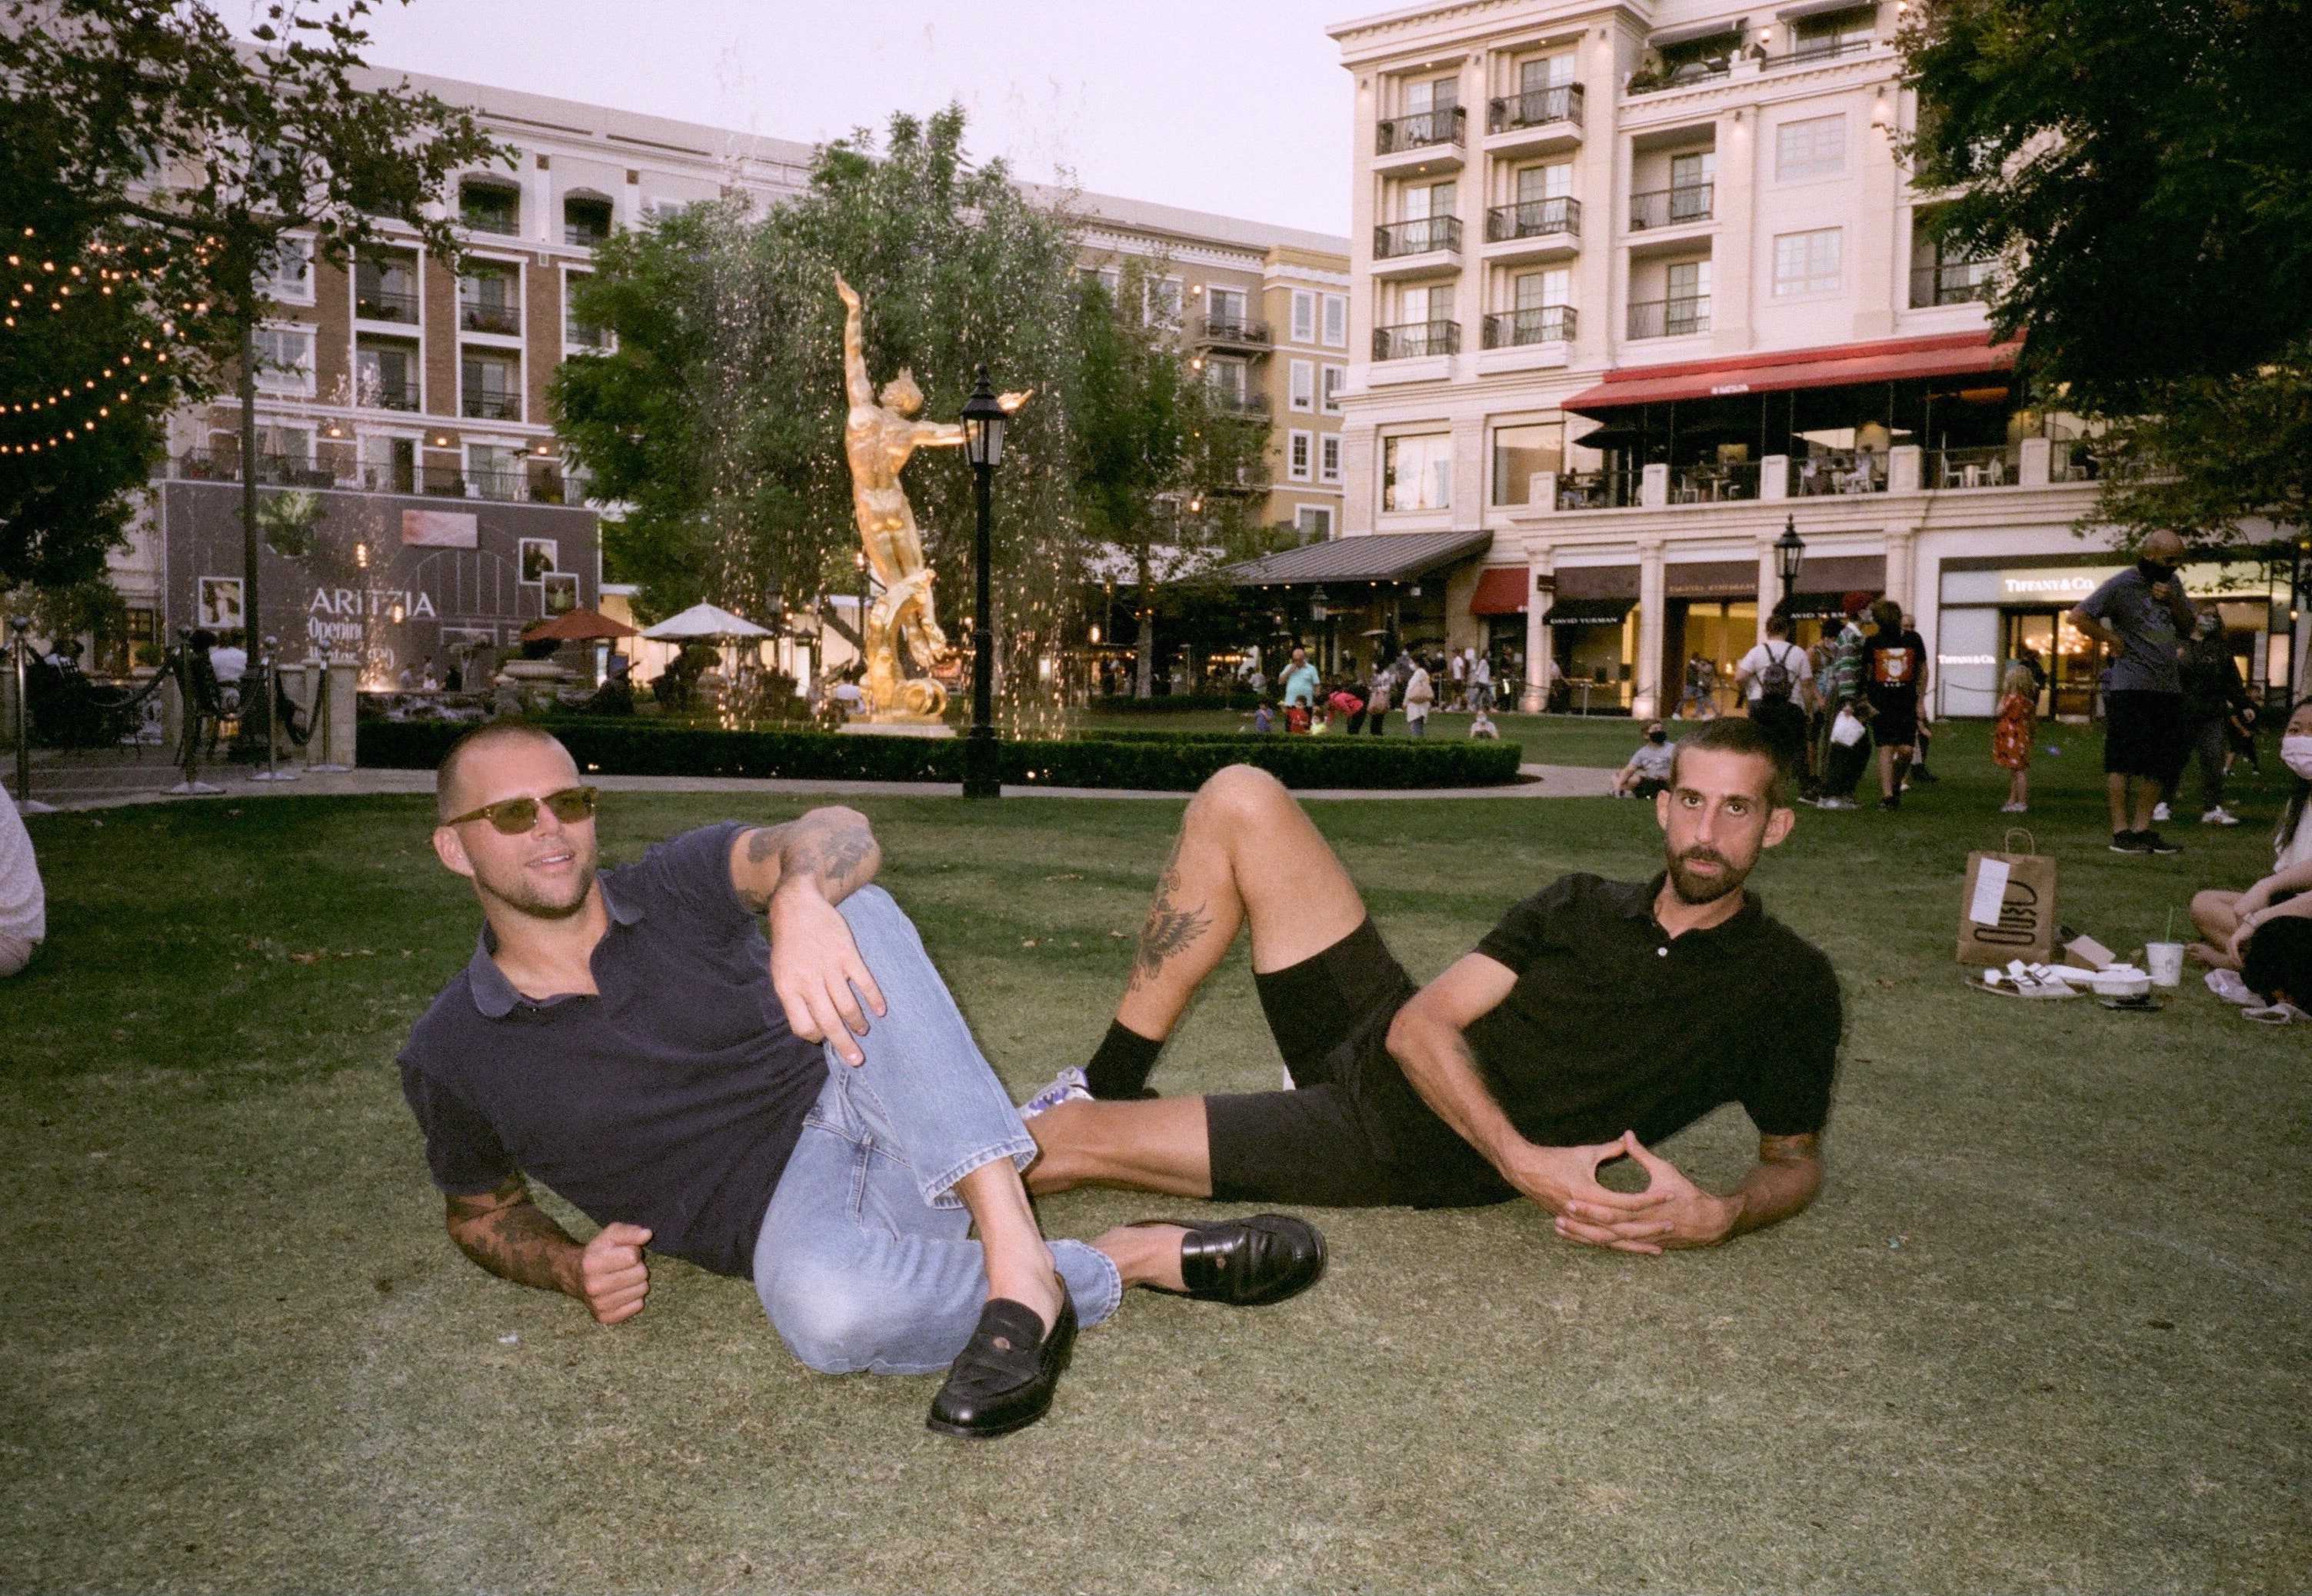 A grainy photograph features How Long Gone hosts Chris Black and Jason Stewart reclining in the grass before a fountain containing a large golden statue of a leaping man.